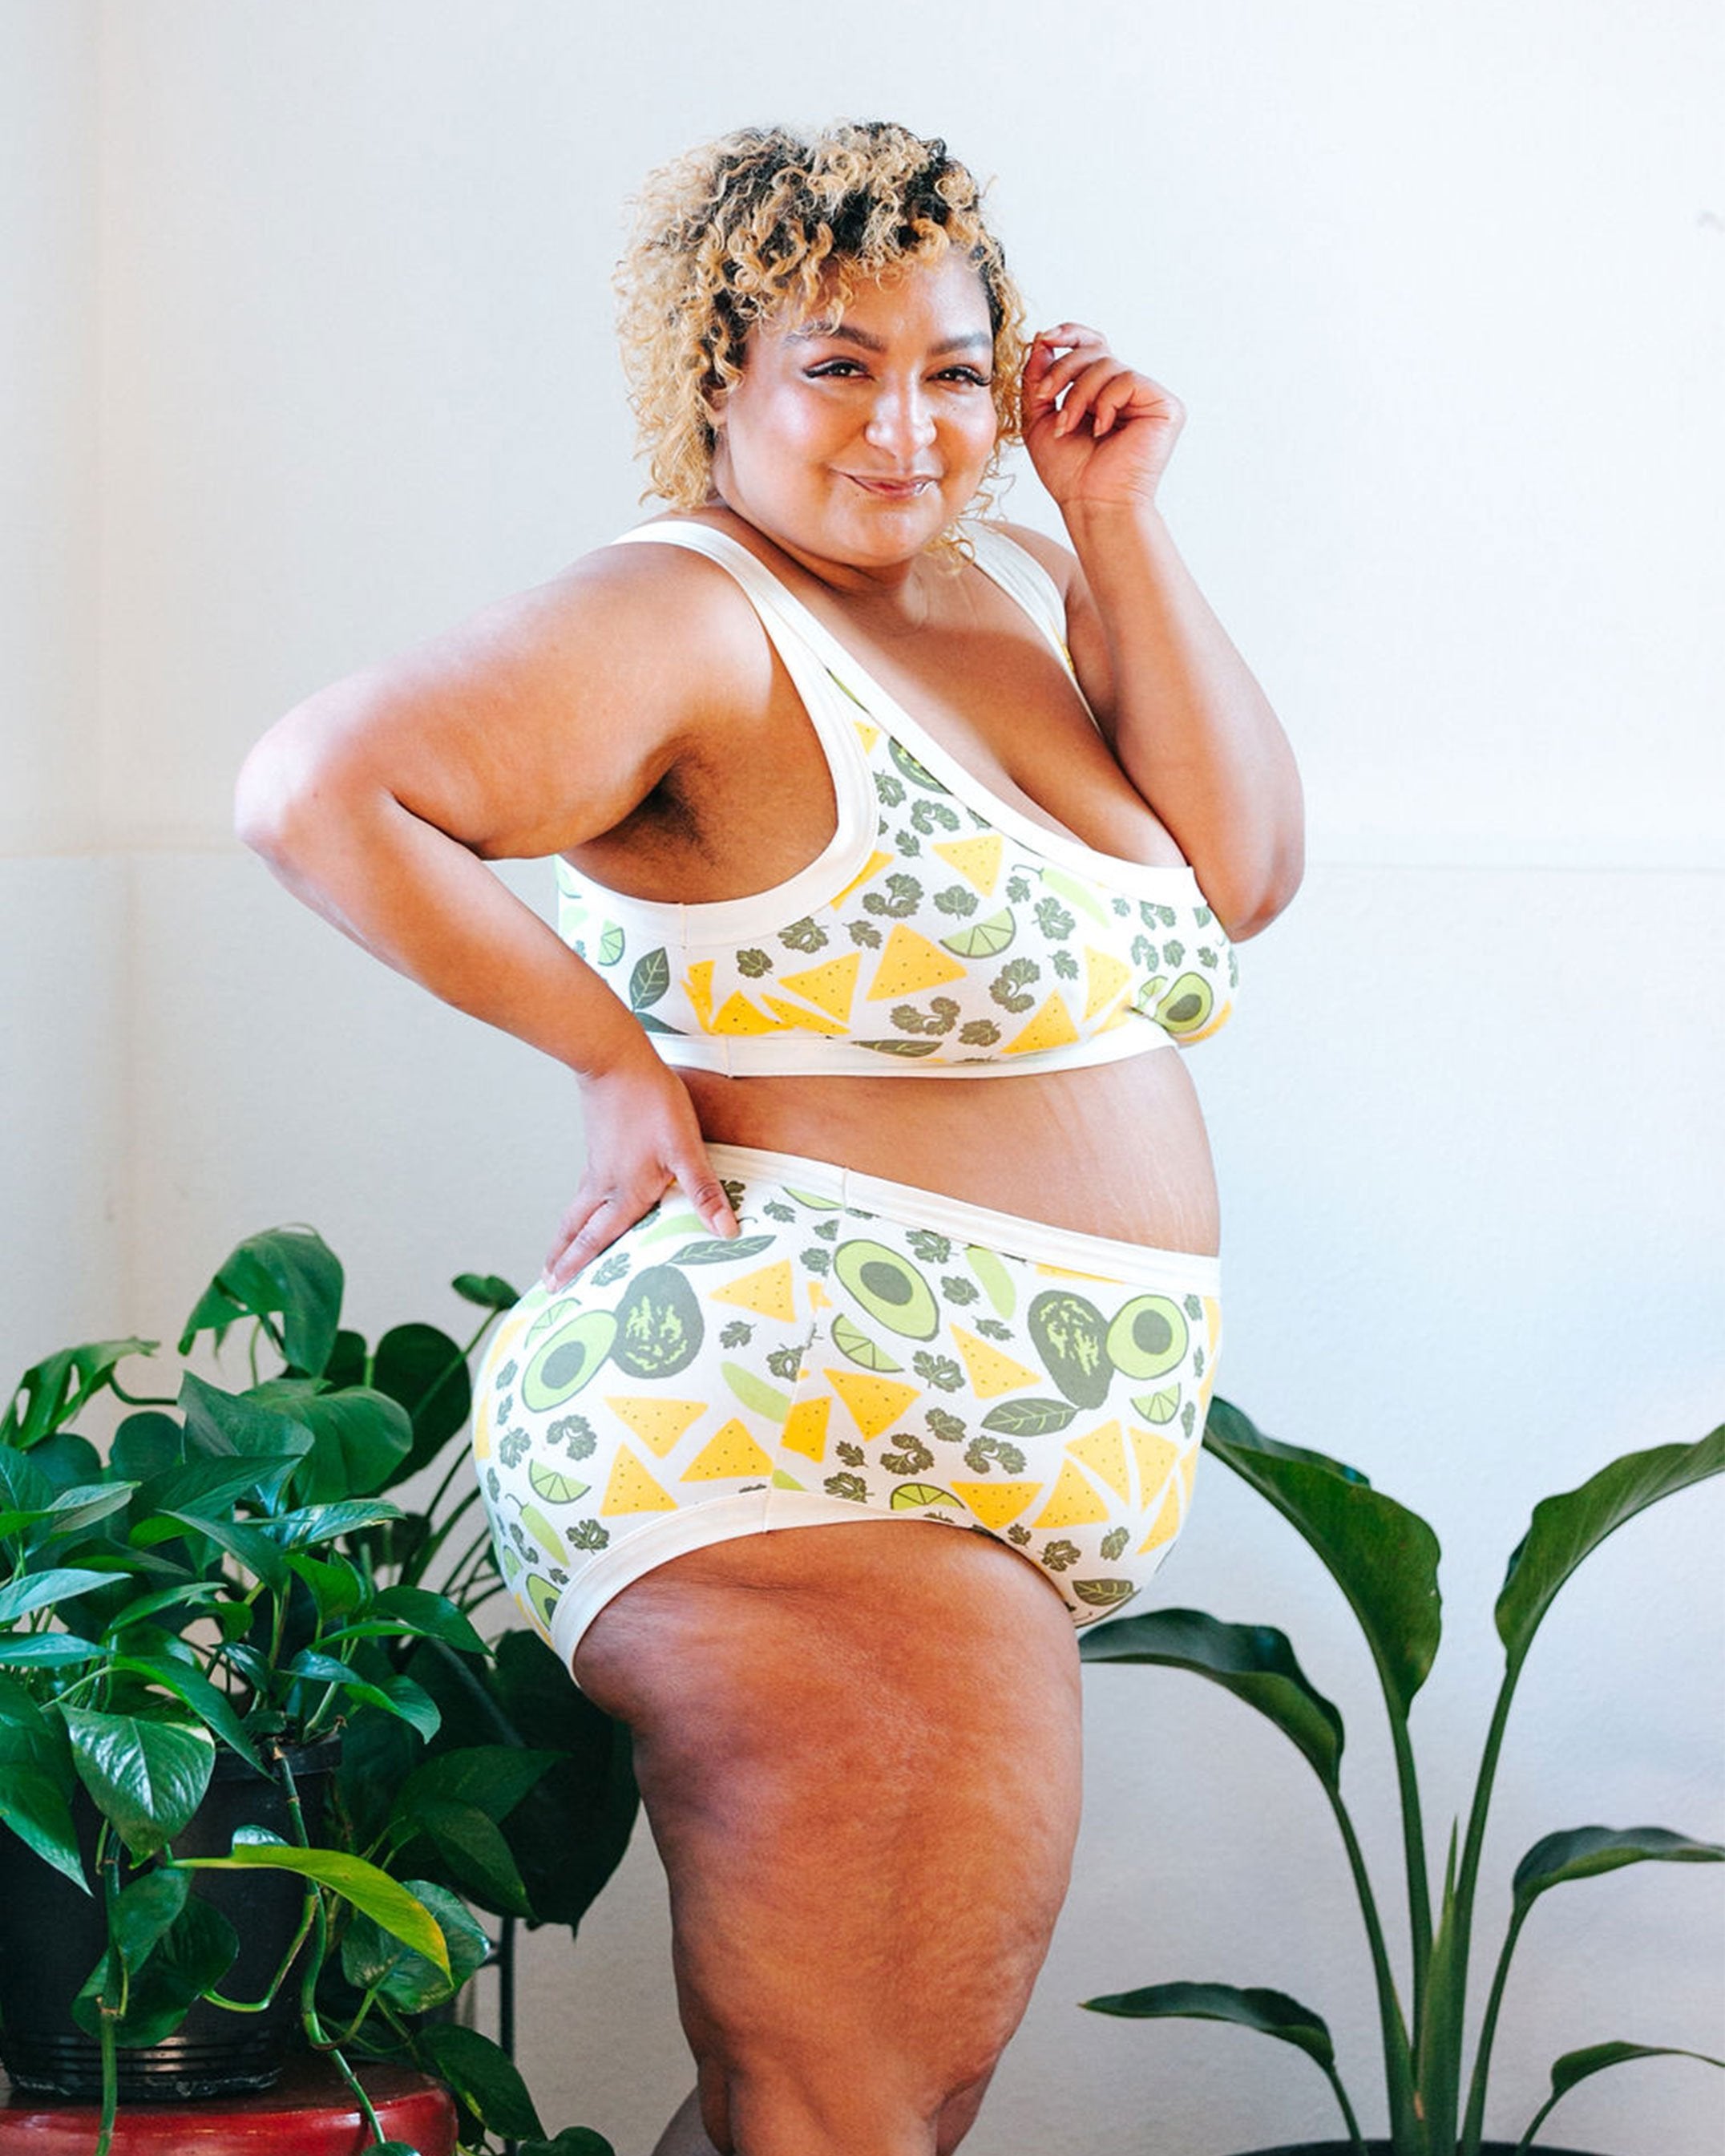 Plus-sized model wearing Thunderpants organic cotton Original style underwear and Bralette in our Party Guac print: a deconstructed guacamole (avocado, cilantro, pepper, lime, and tortilla chip) print with plants around her.